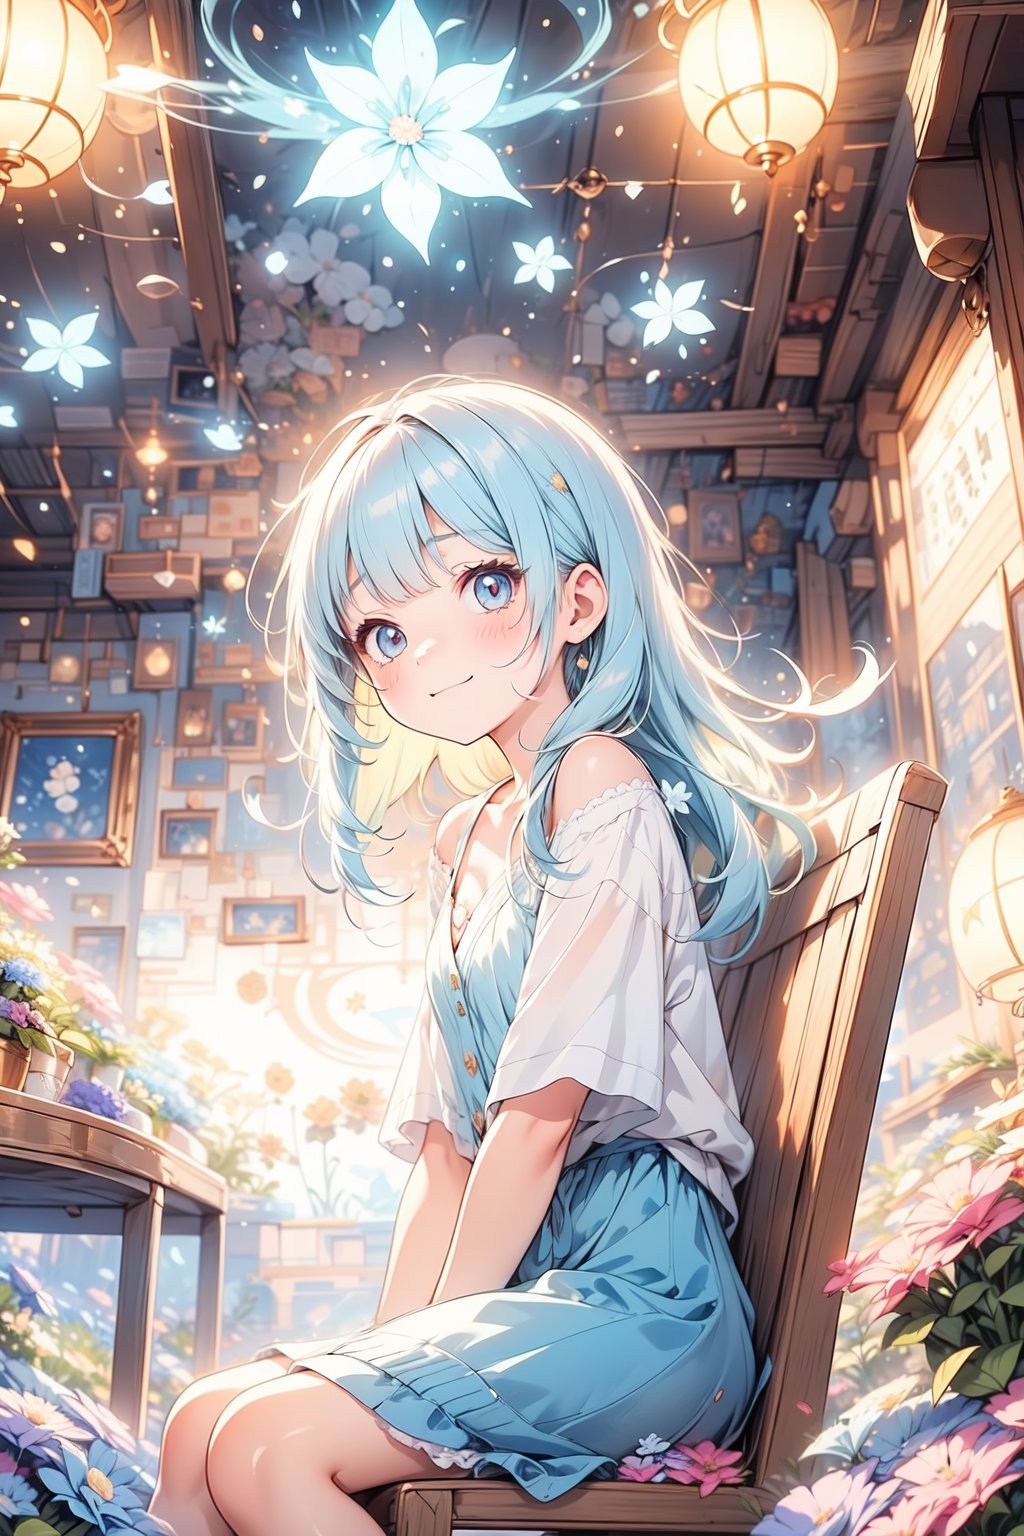 masterpiece, best quality, extremely detailed, (illustration, official art:1.1), 1 girl ,(((( light yellow long hair)))), light yellow hair, , 8 years old, long hair ((blush)) , cute face, big eyes, masterpiece, best quality,(((((a very delicate and beautiful girl))))),Amazing,beautiful detailed eyes,blunt bangs((((little delicate girl)))),tareme(true beautiful:1.2), sense of depth,dynamic angle,,,, affectionate smile, (true beautiful:1.2),,(tiny 1girl model:1.2),)(flat chest)),(Master photography:1.4),(Beautiful and delicate girl:1.2),green light, tranquil, no lineart, Anime Cafe, abandoned room, big windows, leaves are falling, 1gitl sitting on wooden chair, light yellow hair and purple dress, closed eyes,(sitting with one knee up:1.1), cardigan, luminous glow, mystic atmosphere, depth of field, dynamic angle, light particle effect, light leaks, aerial effect, blue flowers,look into viewers, look into viewers,(sitting with one knee up:1.1), cardigan, luminous glow, mystic atmosphere, depth of field, dynamic angle, light particle effect, light leaks, aerial effect, blue flowers,look into viewers, look into viewers ,ASU1,light